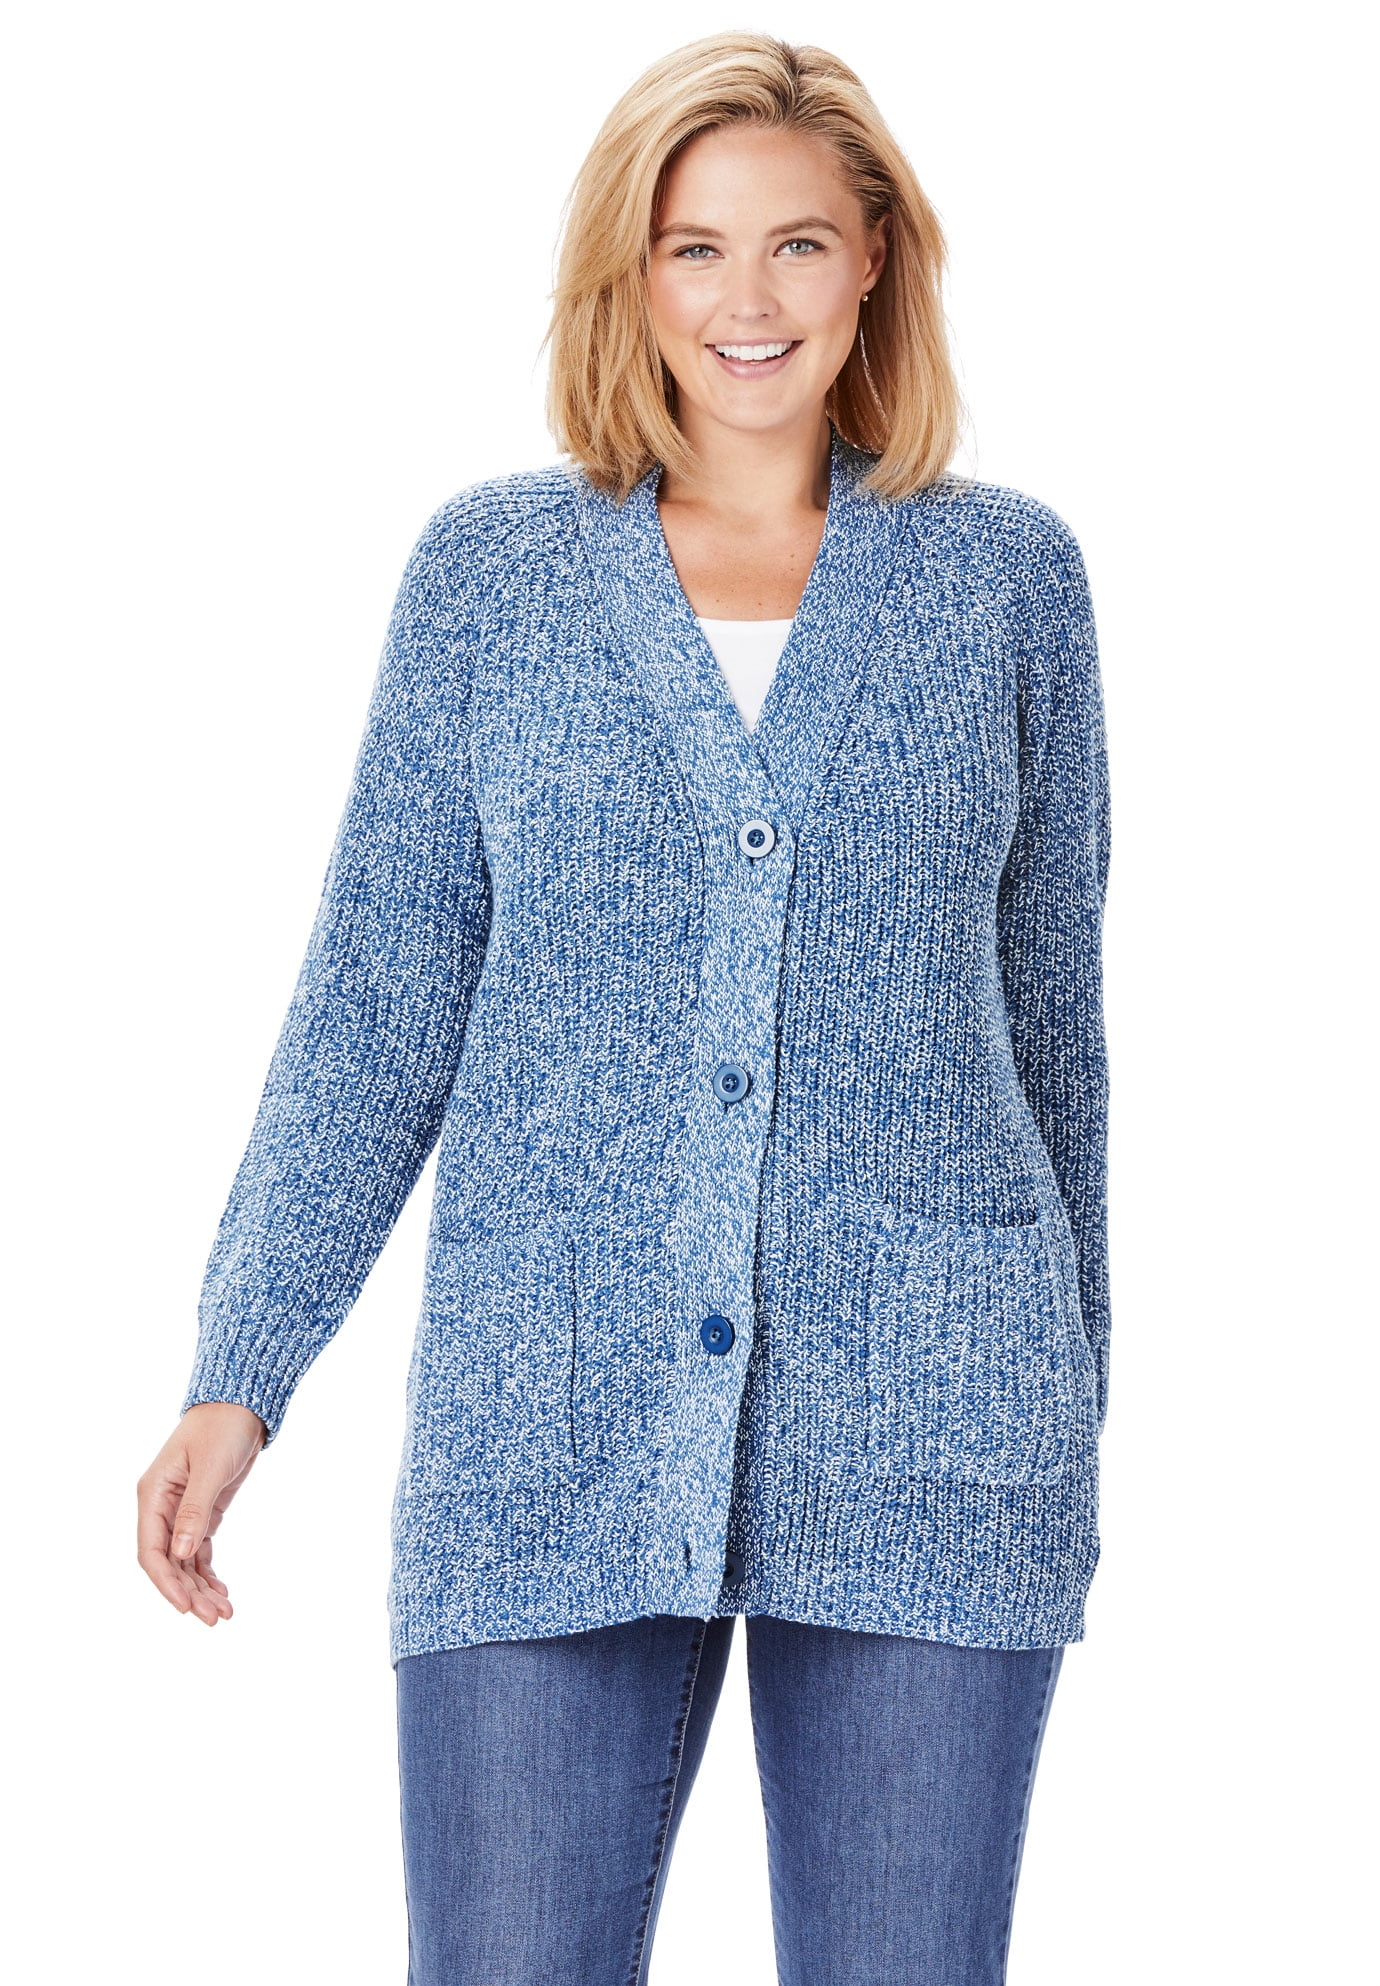 Woman Within - Woman Within Plus Size Long-sleeve Shaker Cardigan ...